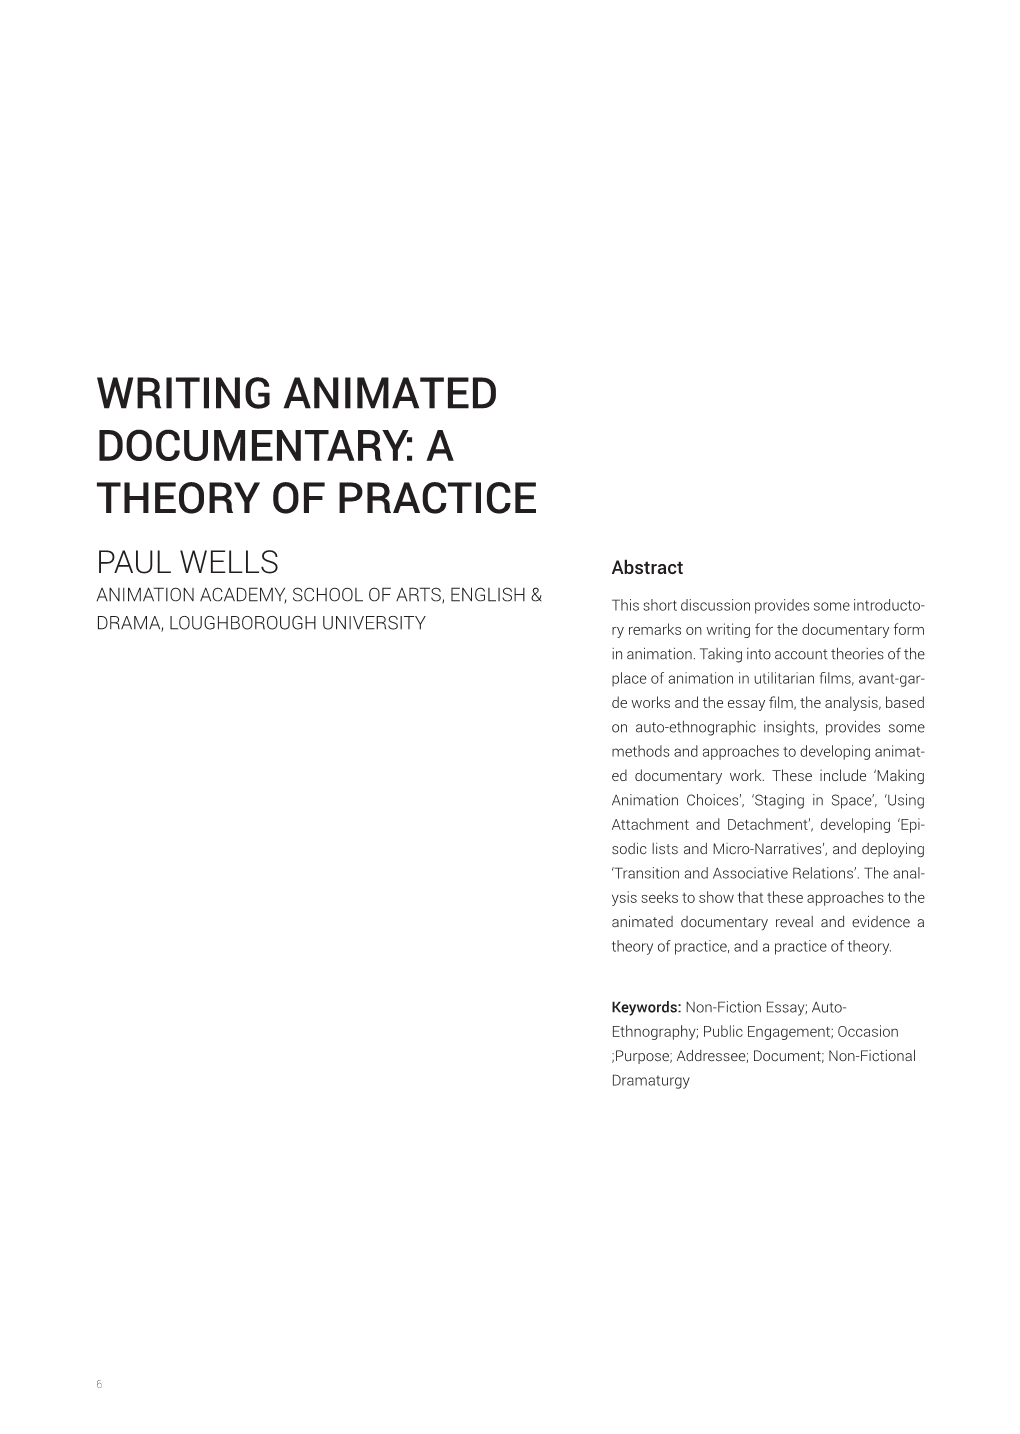 Writing Animated Documentary: a Theory of Practice